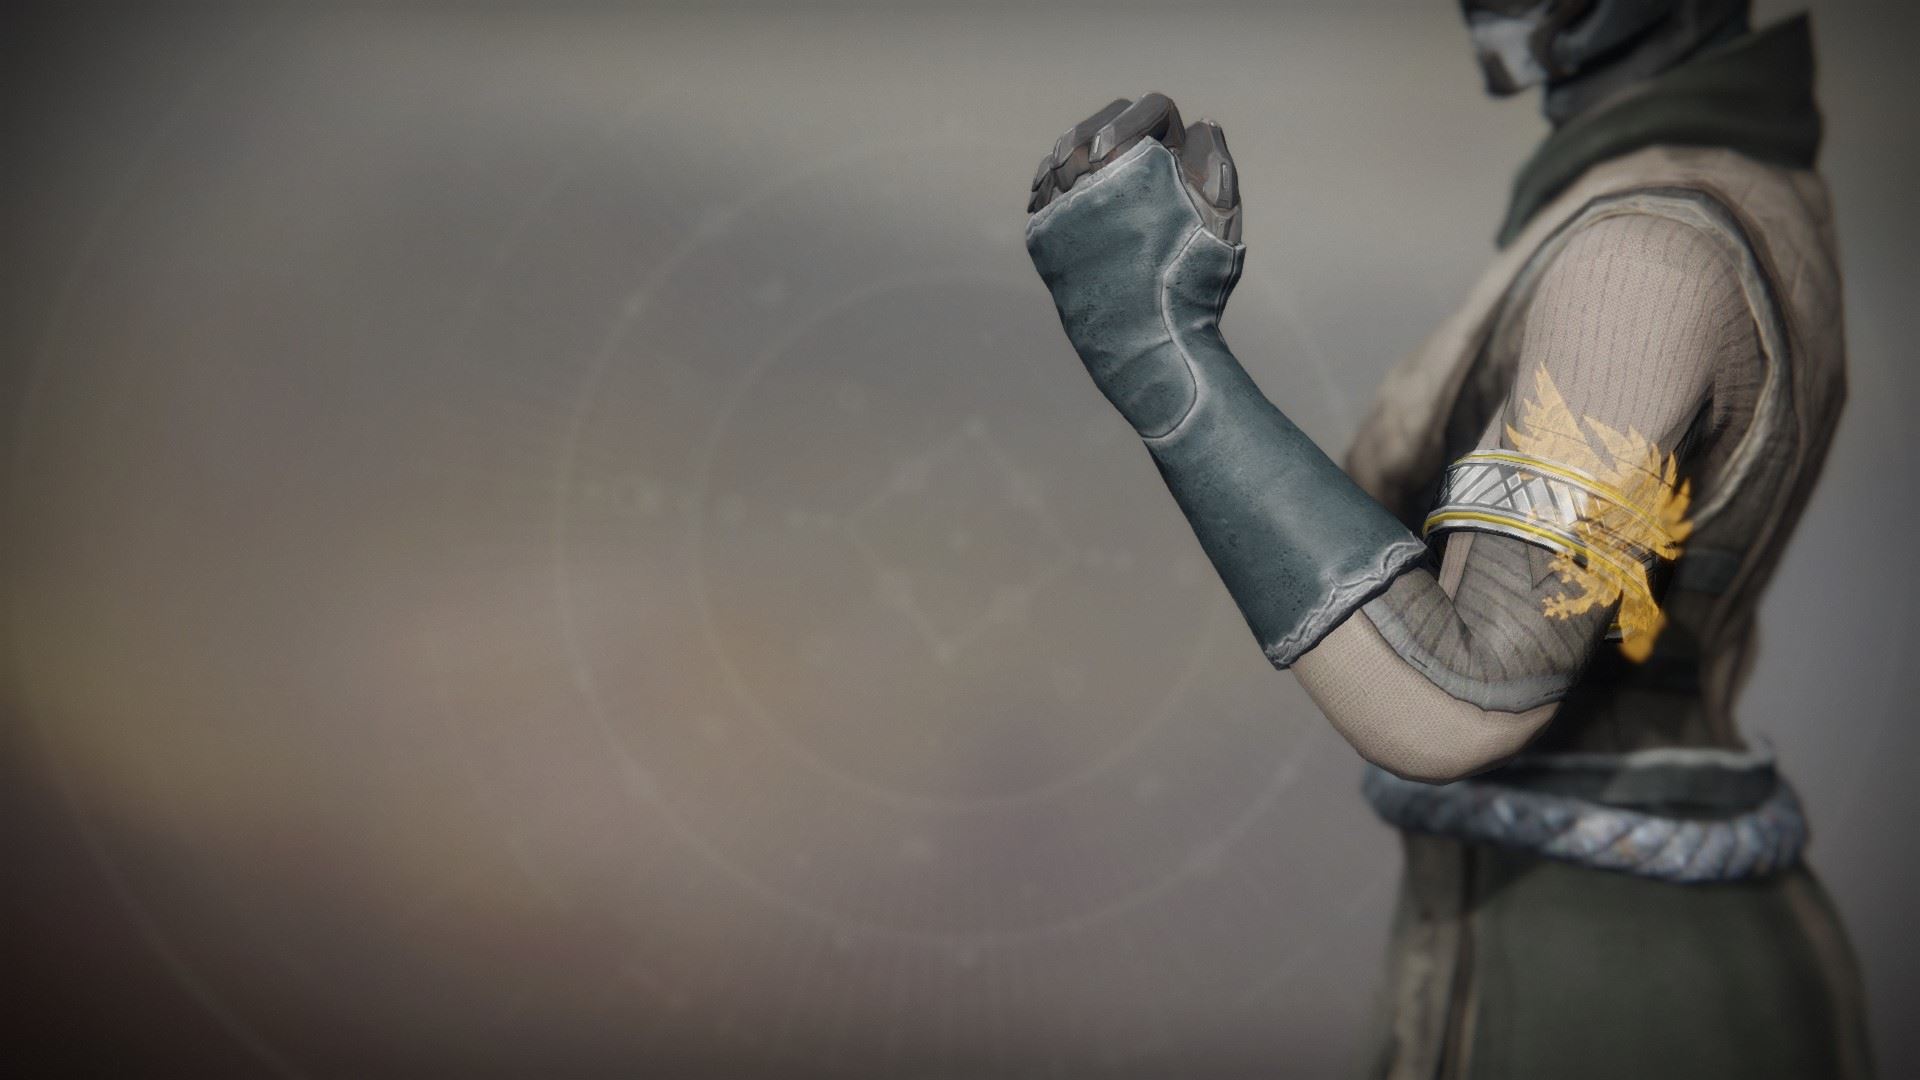 An in-game render of the Solstice Bond (Scorched).